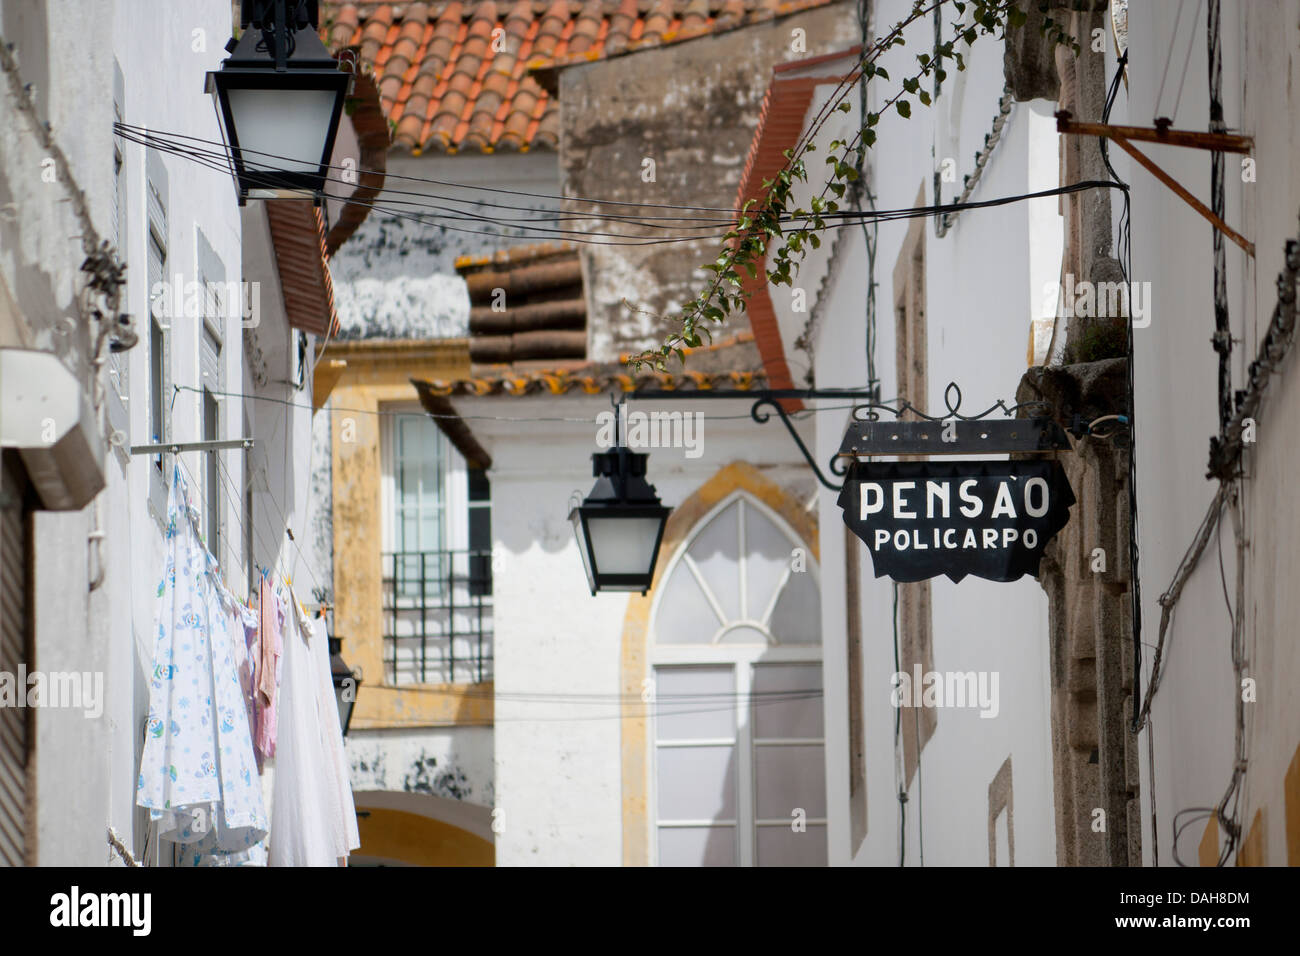 Street with typical whitewashed buildings, street lamps, architectural details and pensao or hotel sign Évora Alentejo Portugal Stock Photo